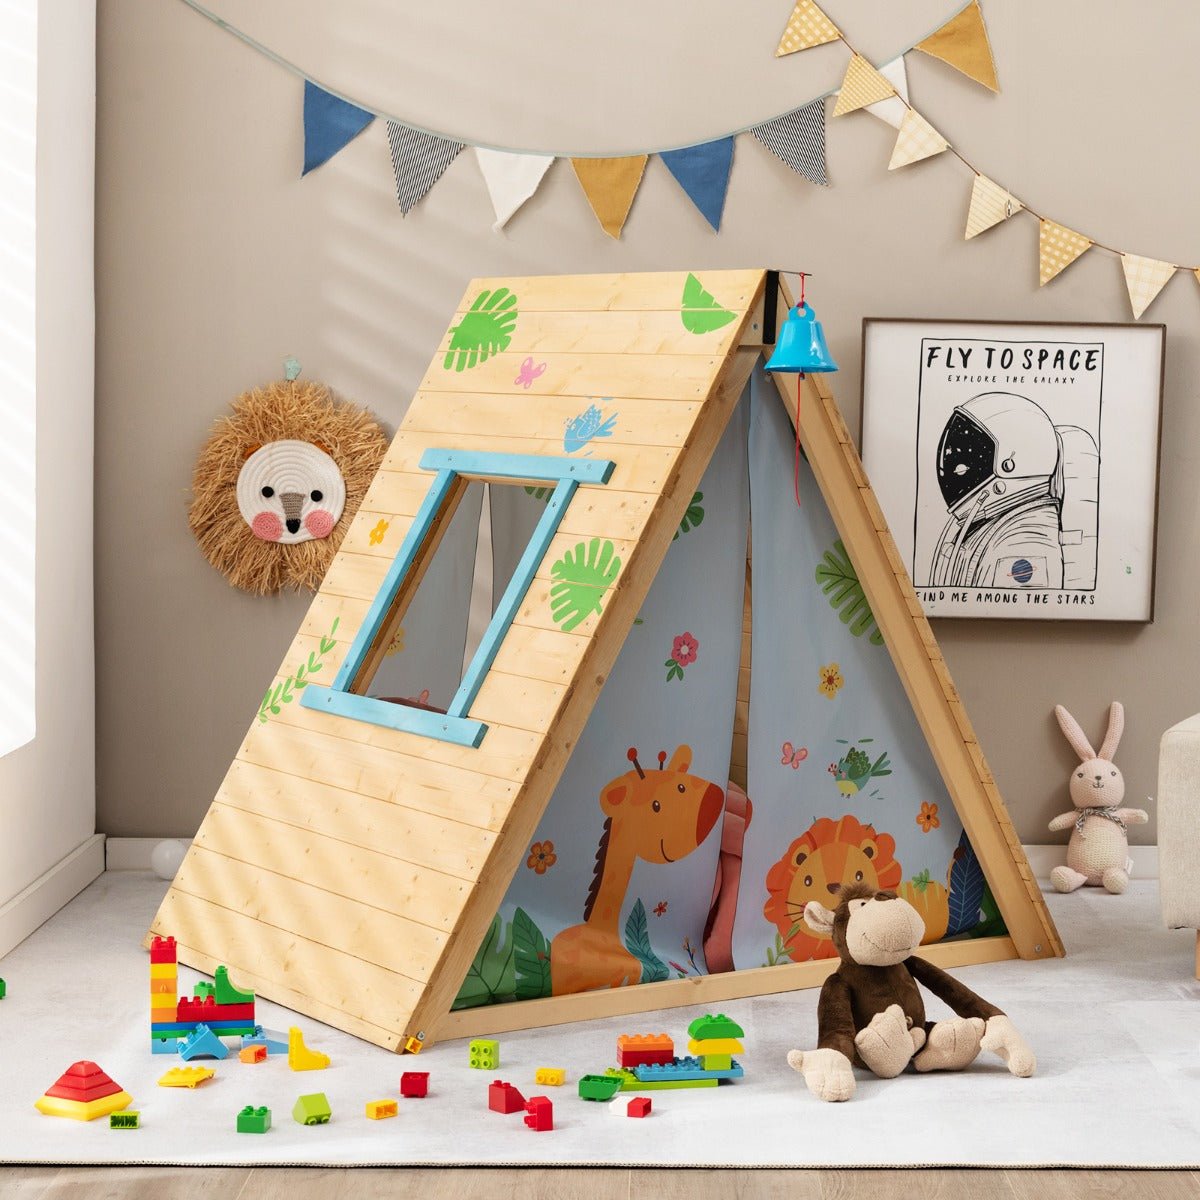 Playful Adventures: Kids Play Tent with Wooden Climbing Triangle for Creativity